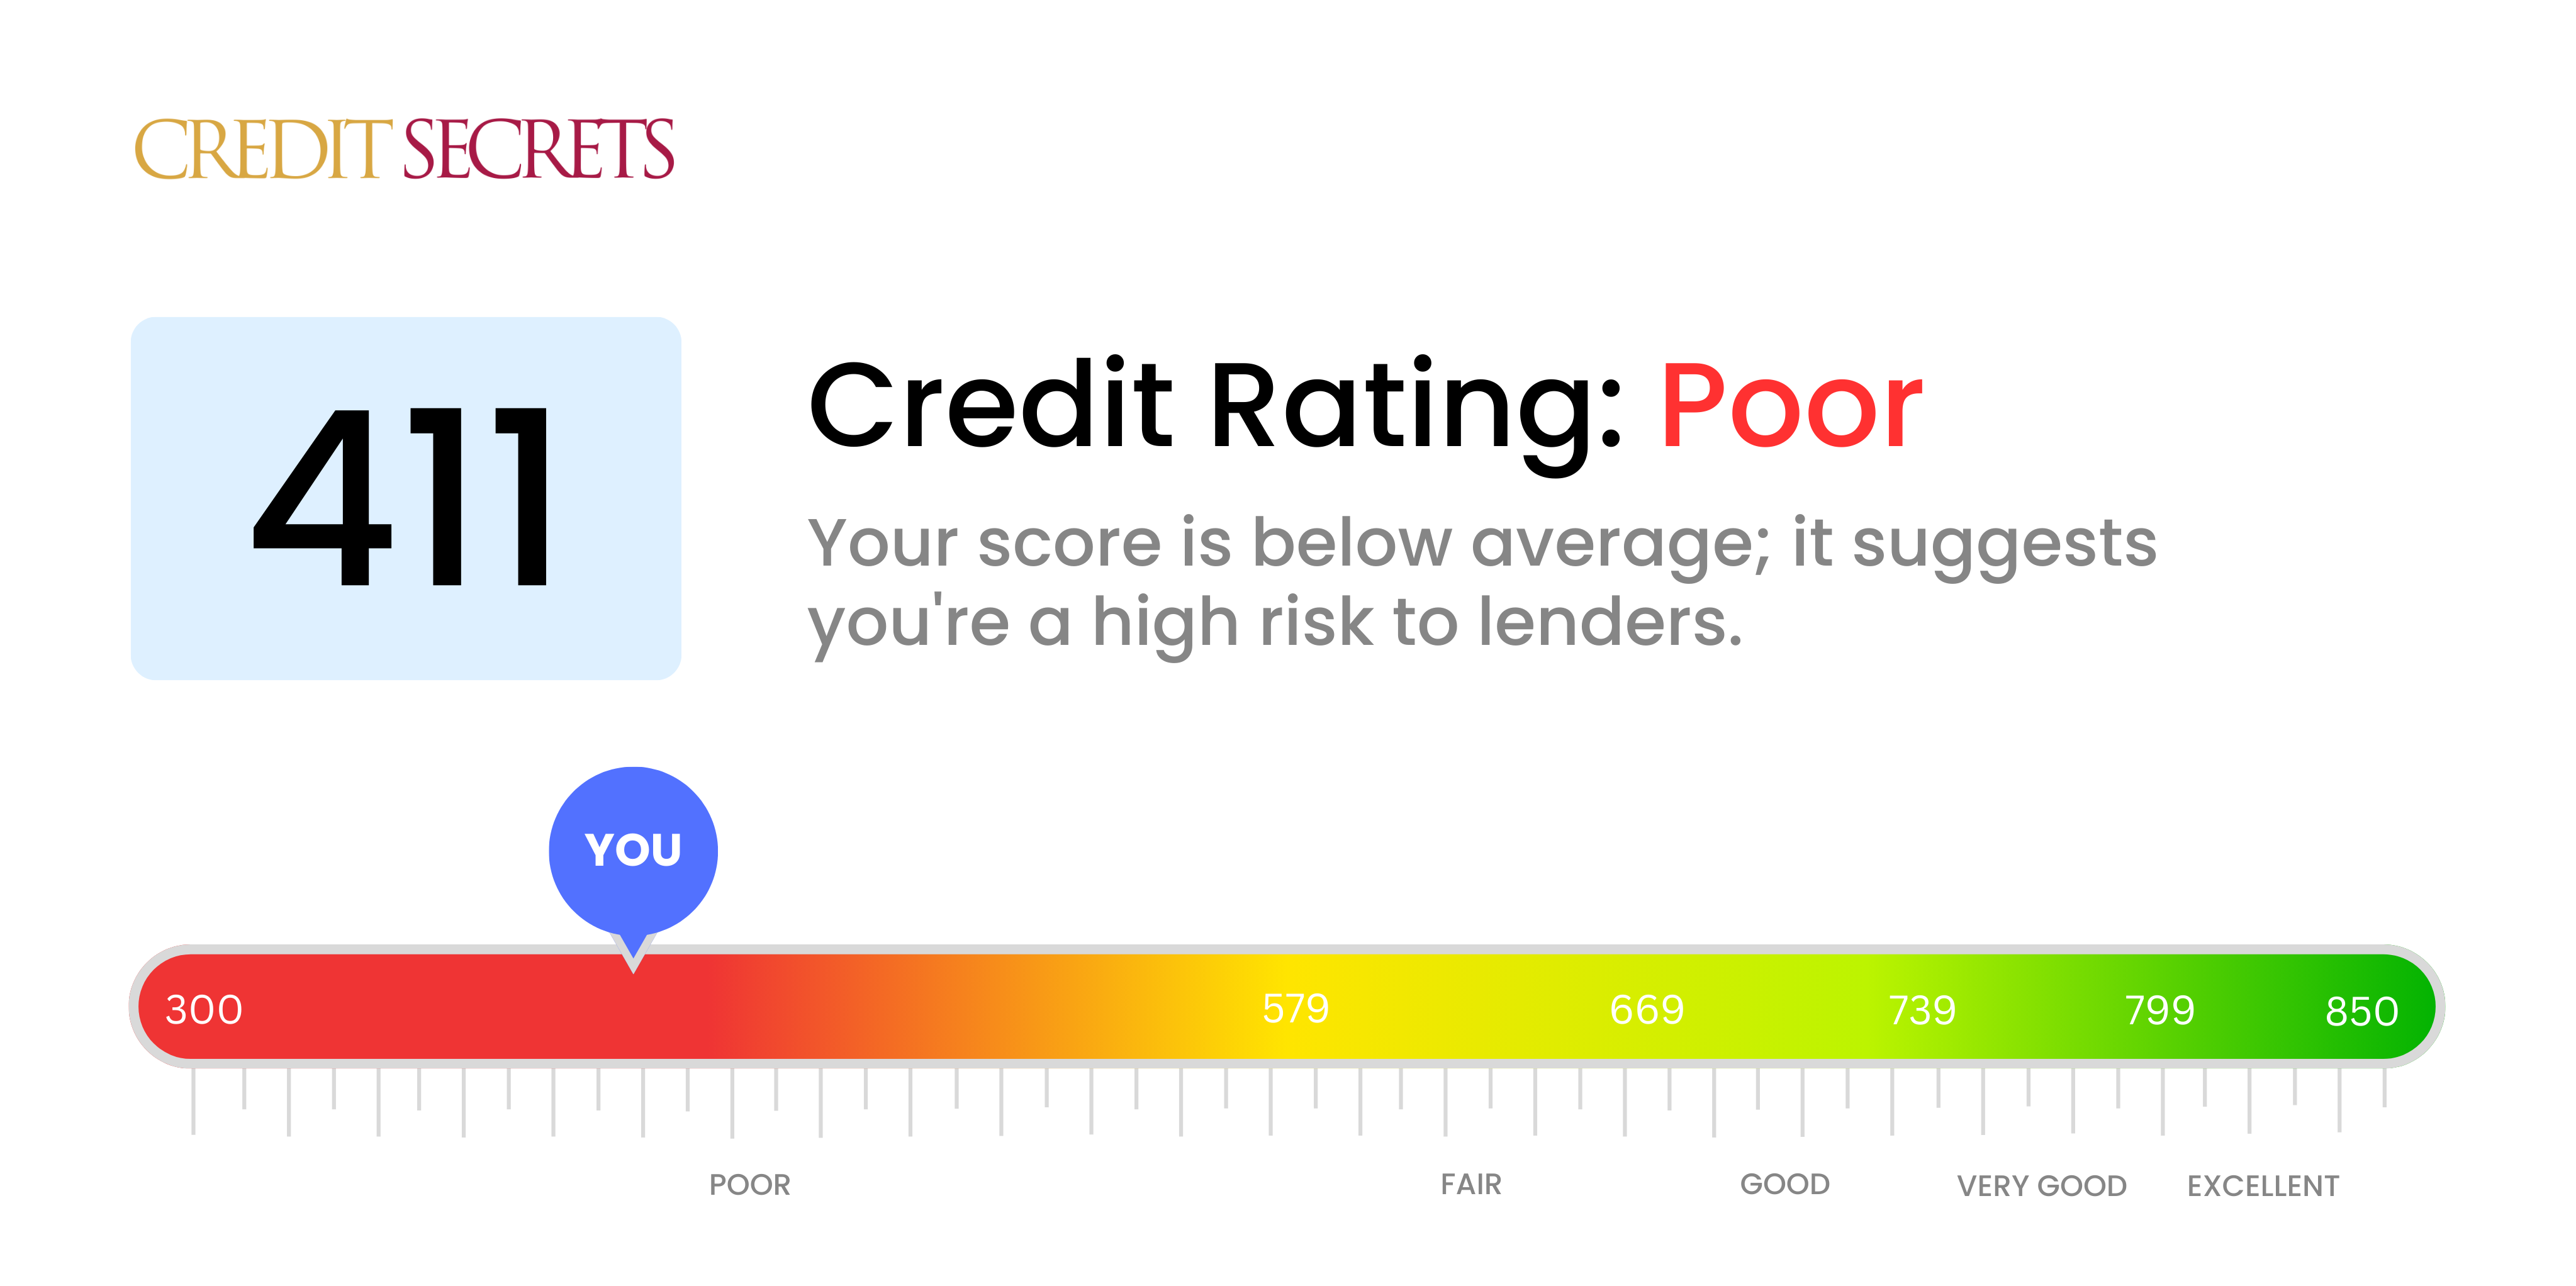 Is 411 a good credit score?